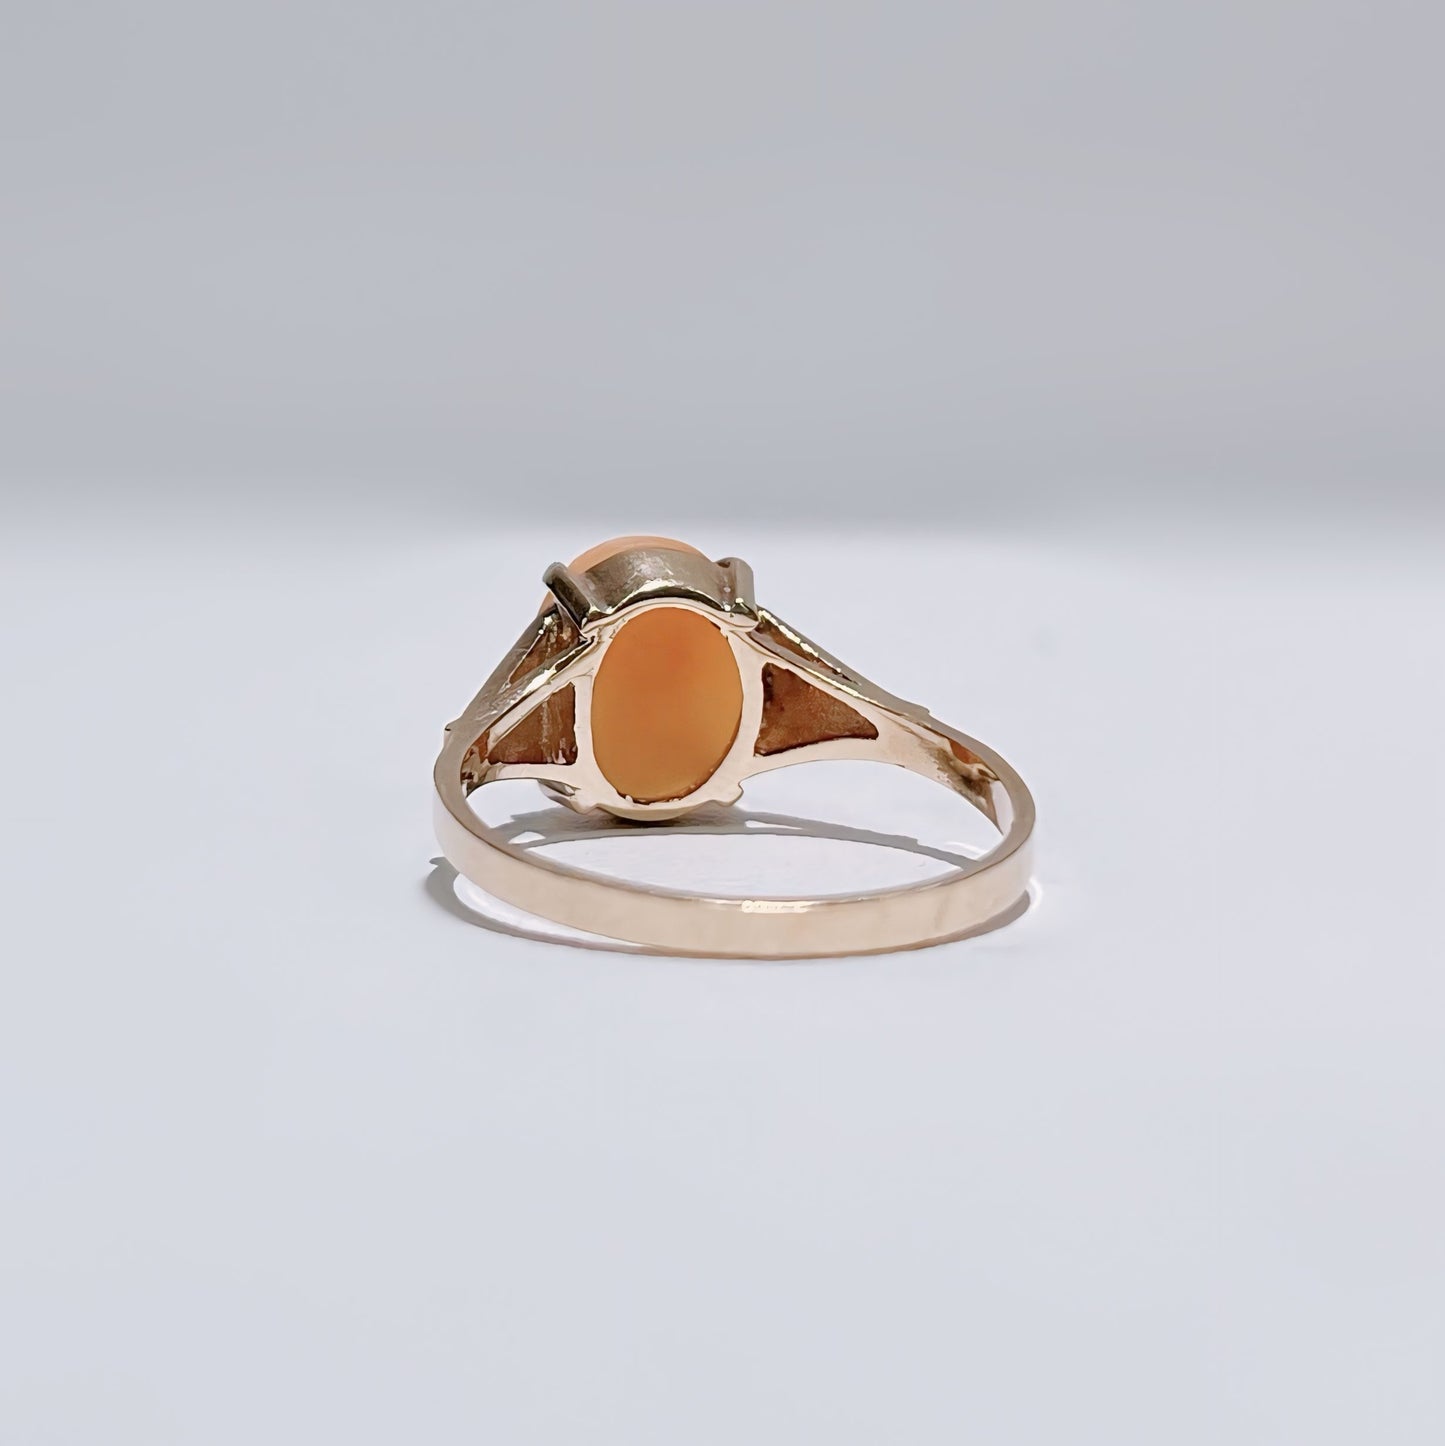 Vintage 1960s 9ct Yellow Gold Cameo Ring - Size L1/2